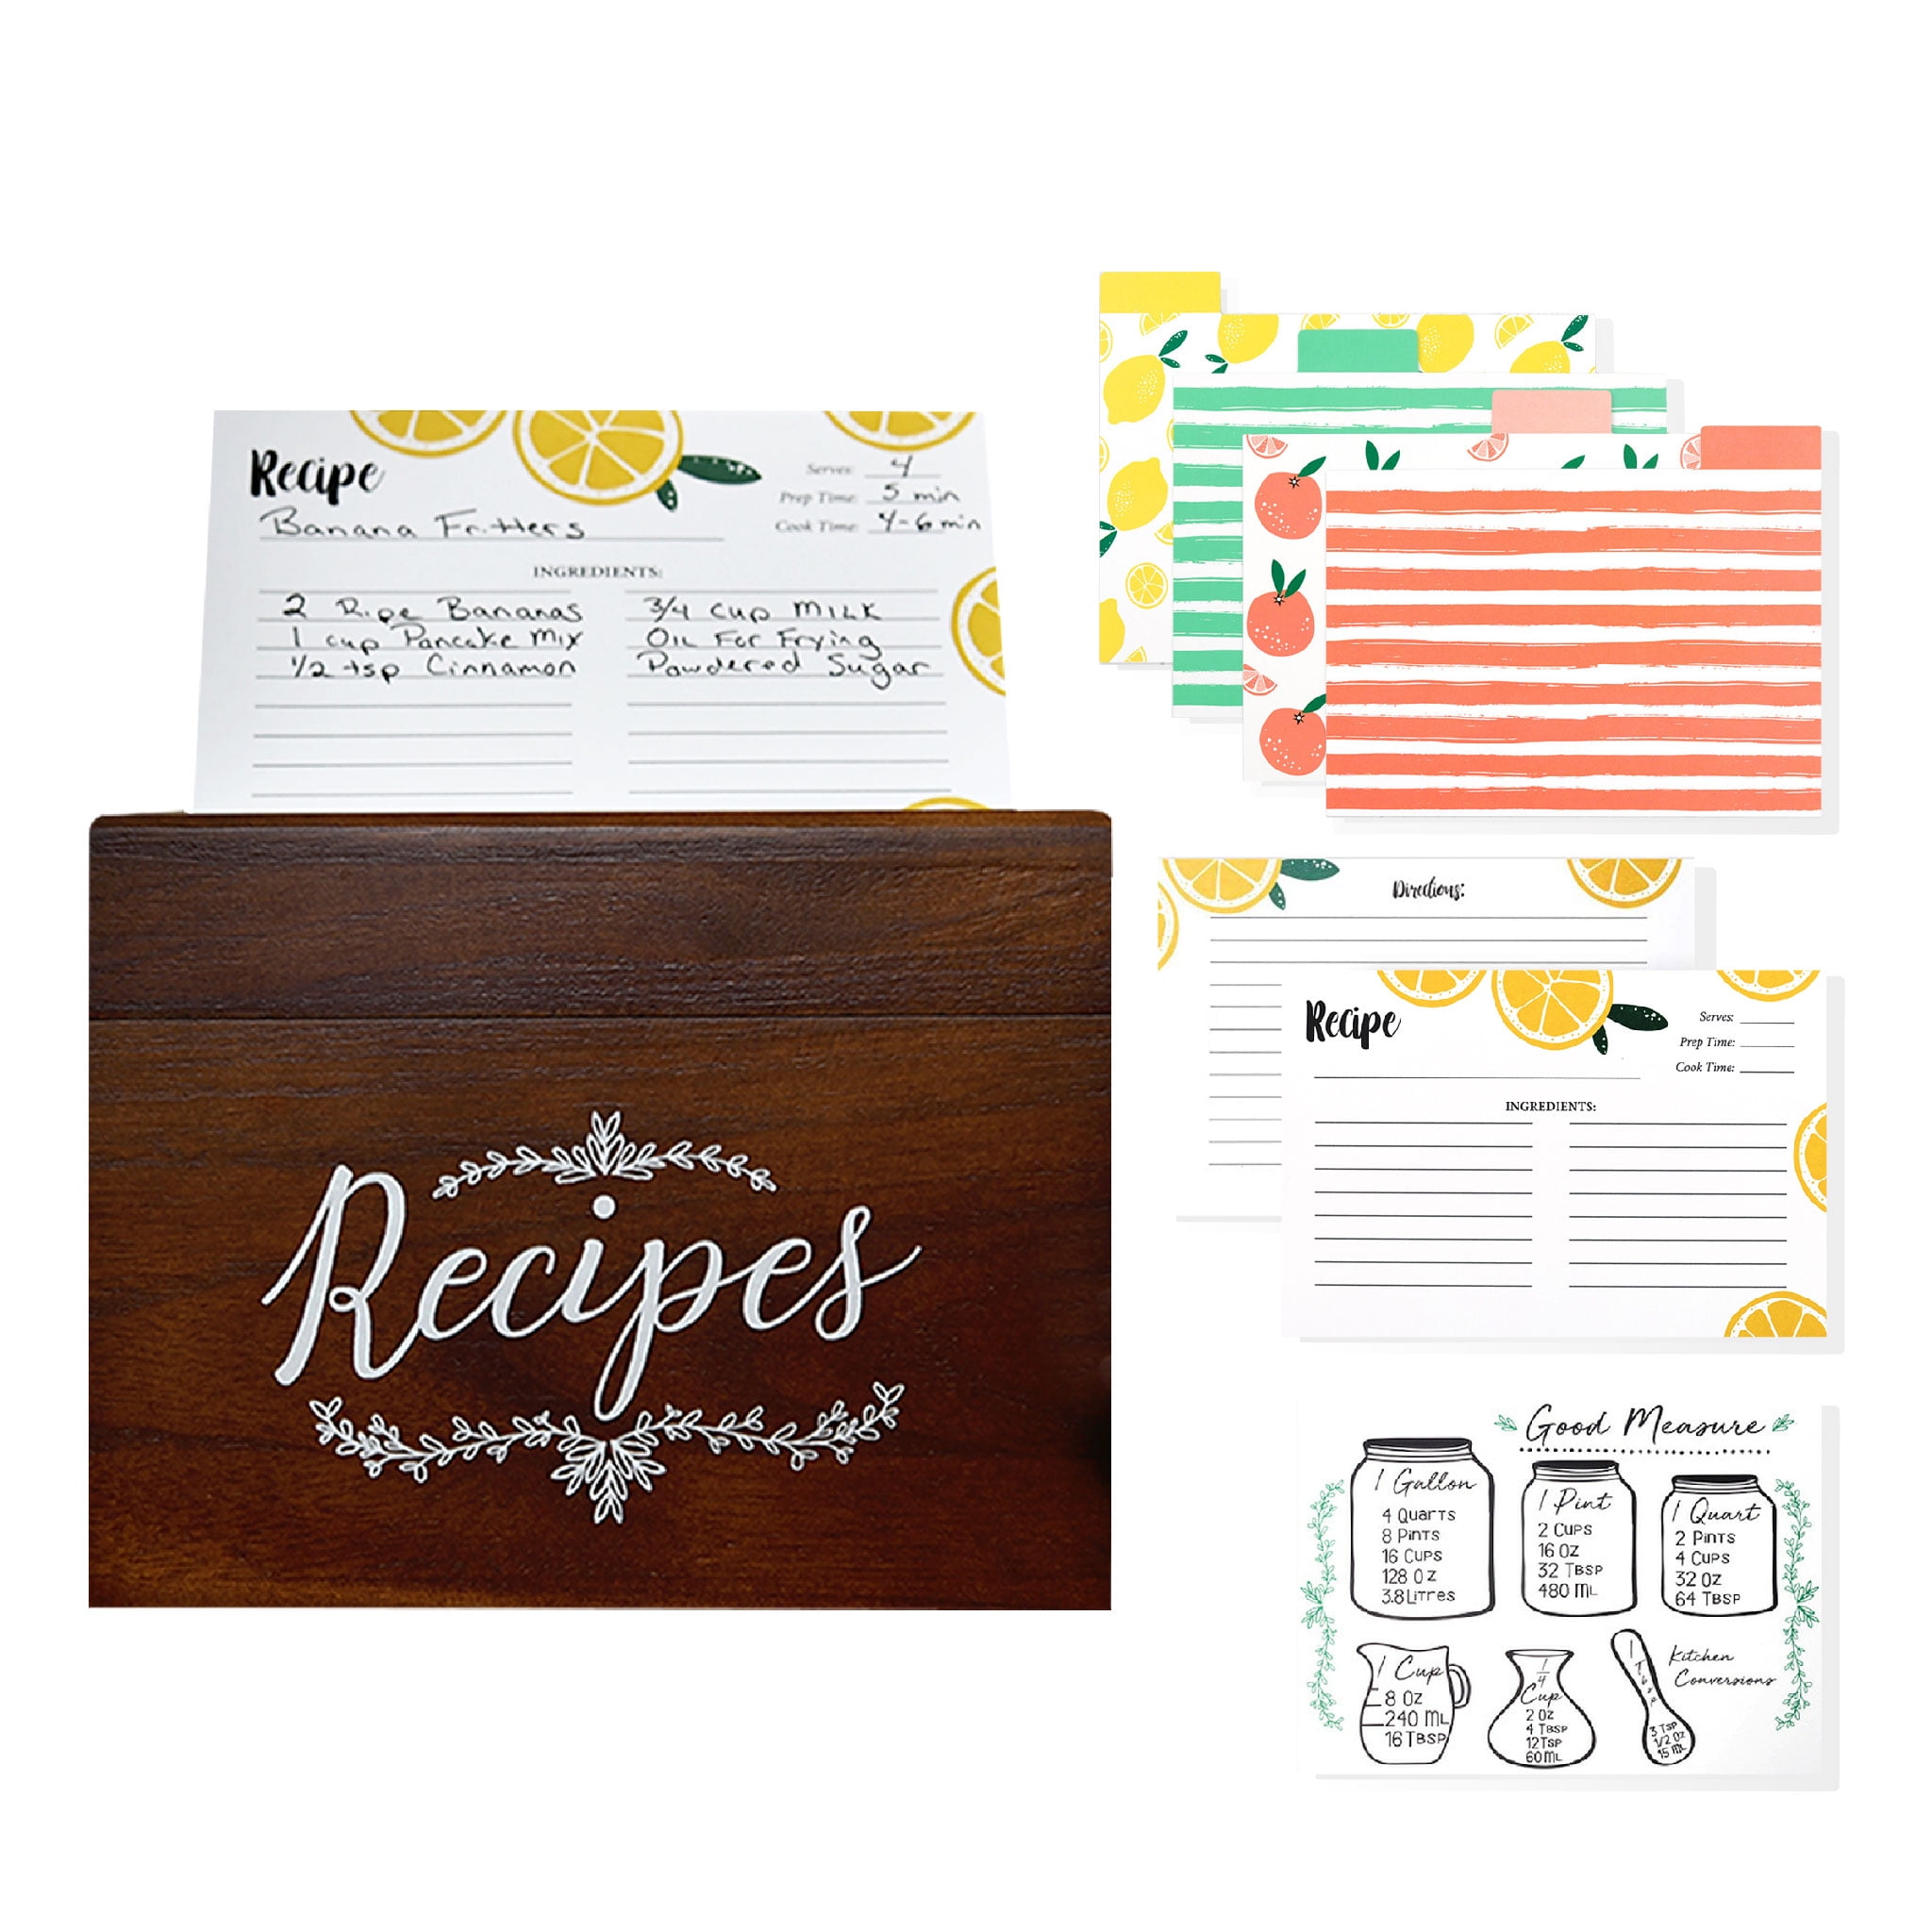 Free Printable Farmhouse Floral Recipe Cards and Dividers - The